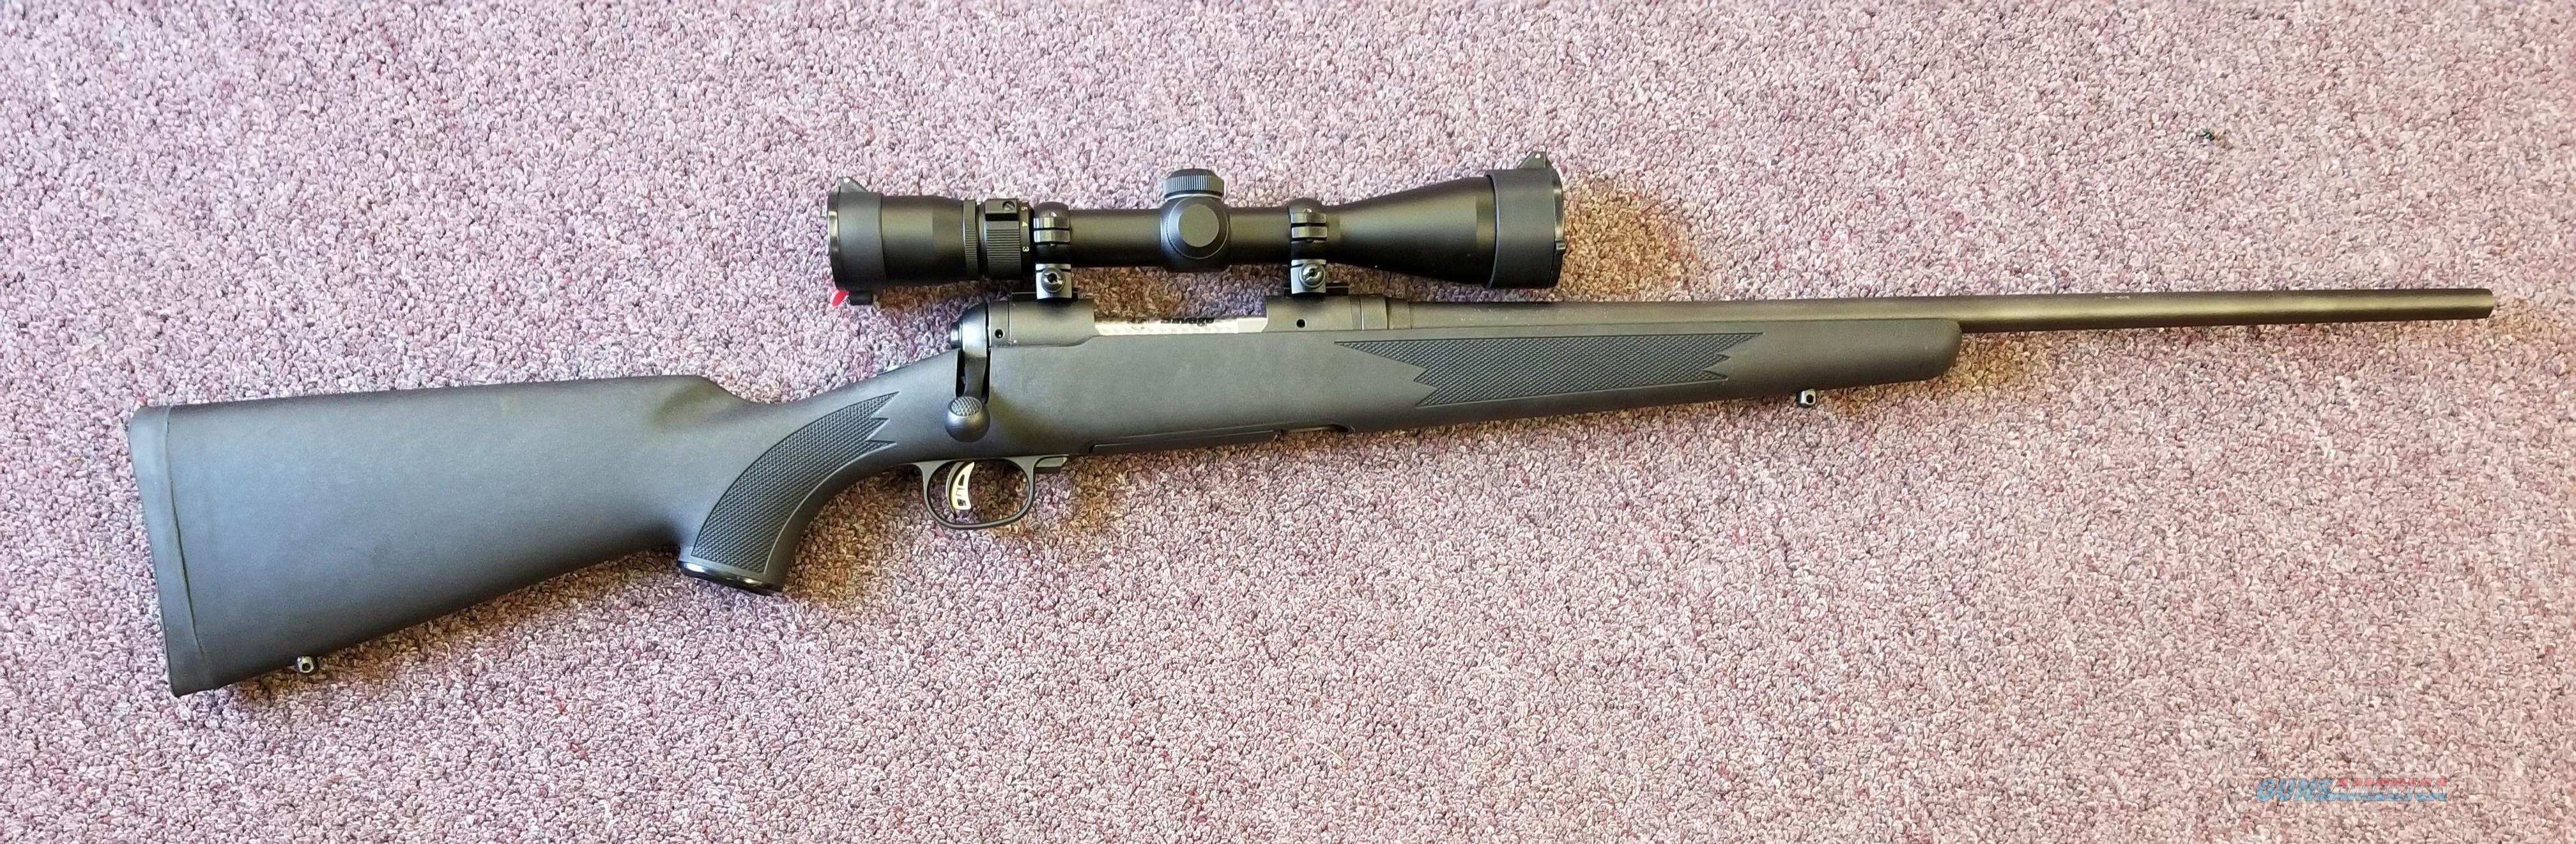 Savage 11 Bolt Action Rifle 223 For Sale At